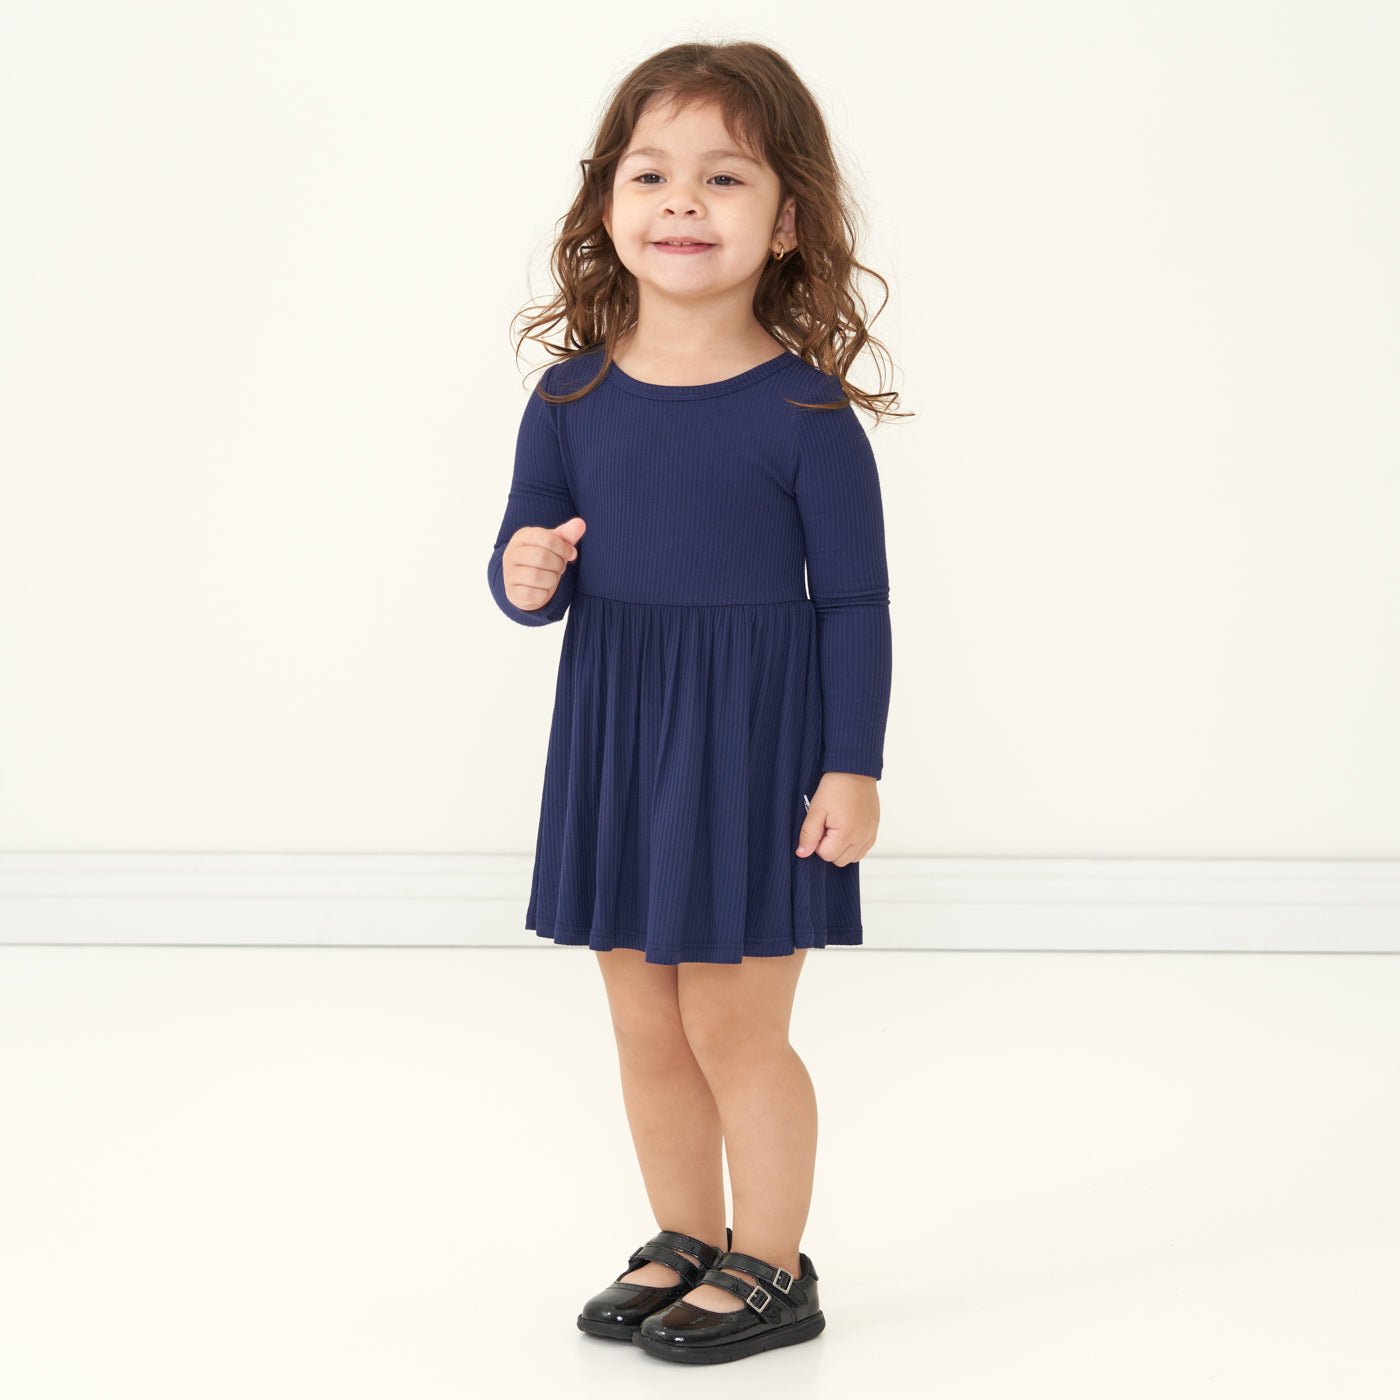 Alternate image of a child wearing a Classic Navy ribbed twirl dress with bodysuit